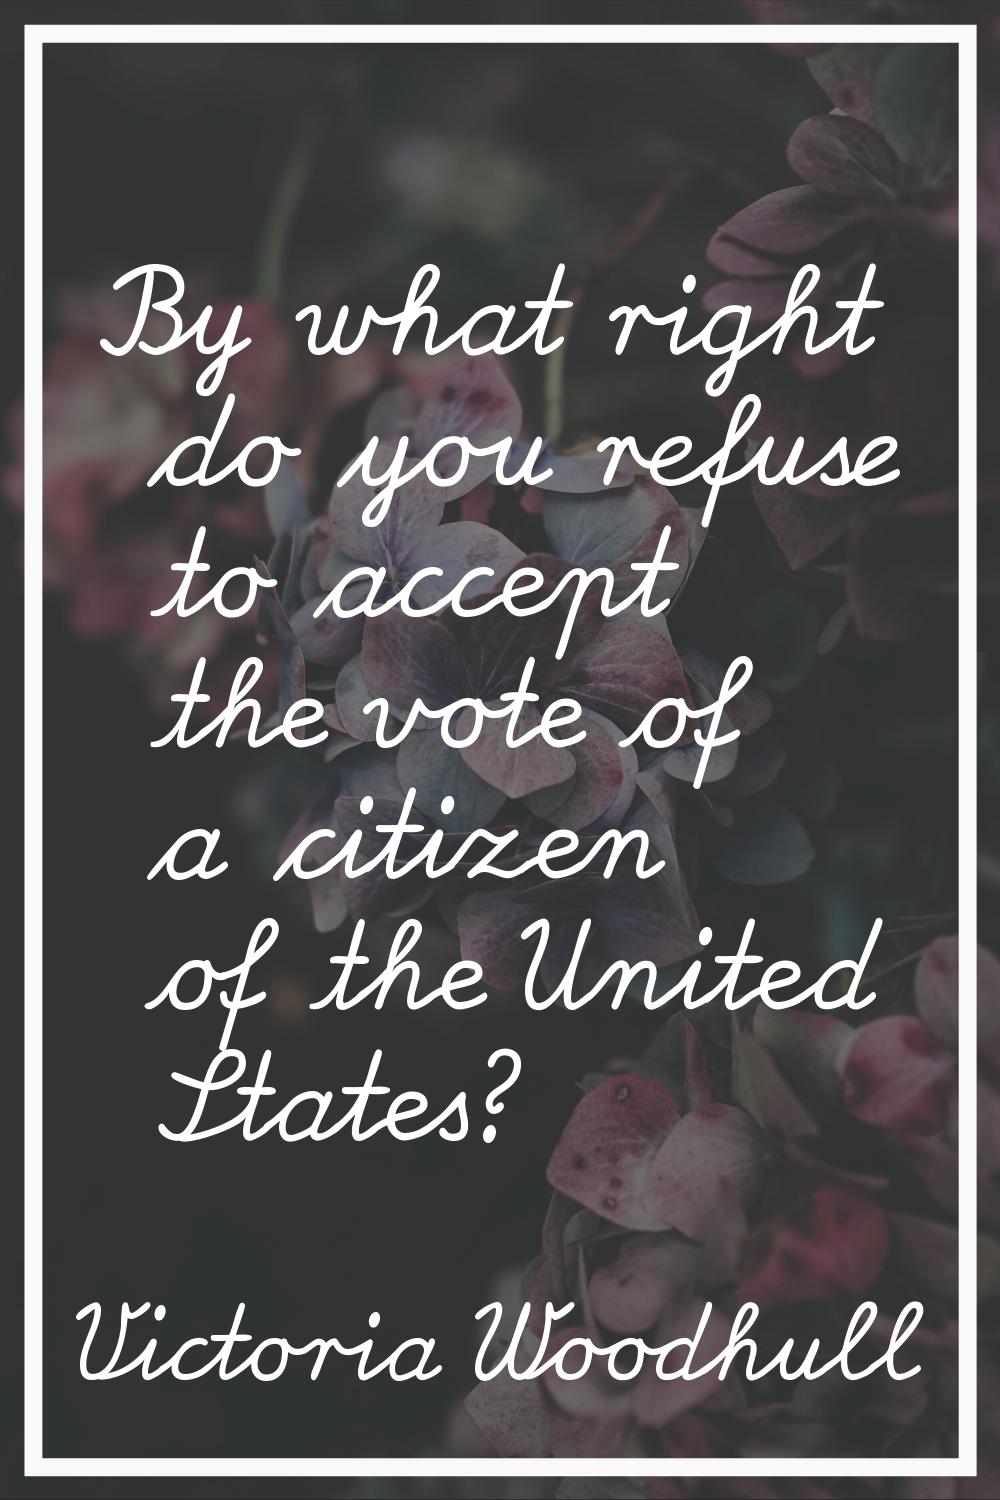 By what right do you refuse to accept the vote of a citizen of the United States?